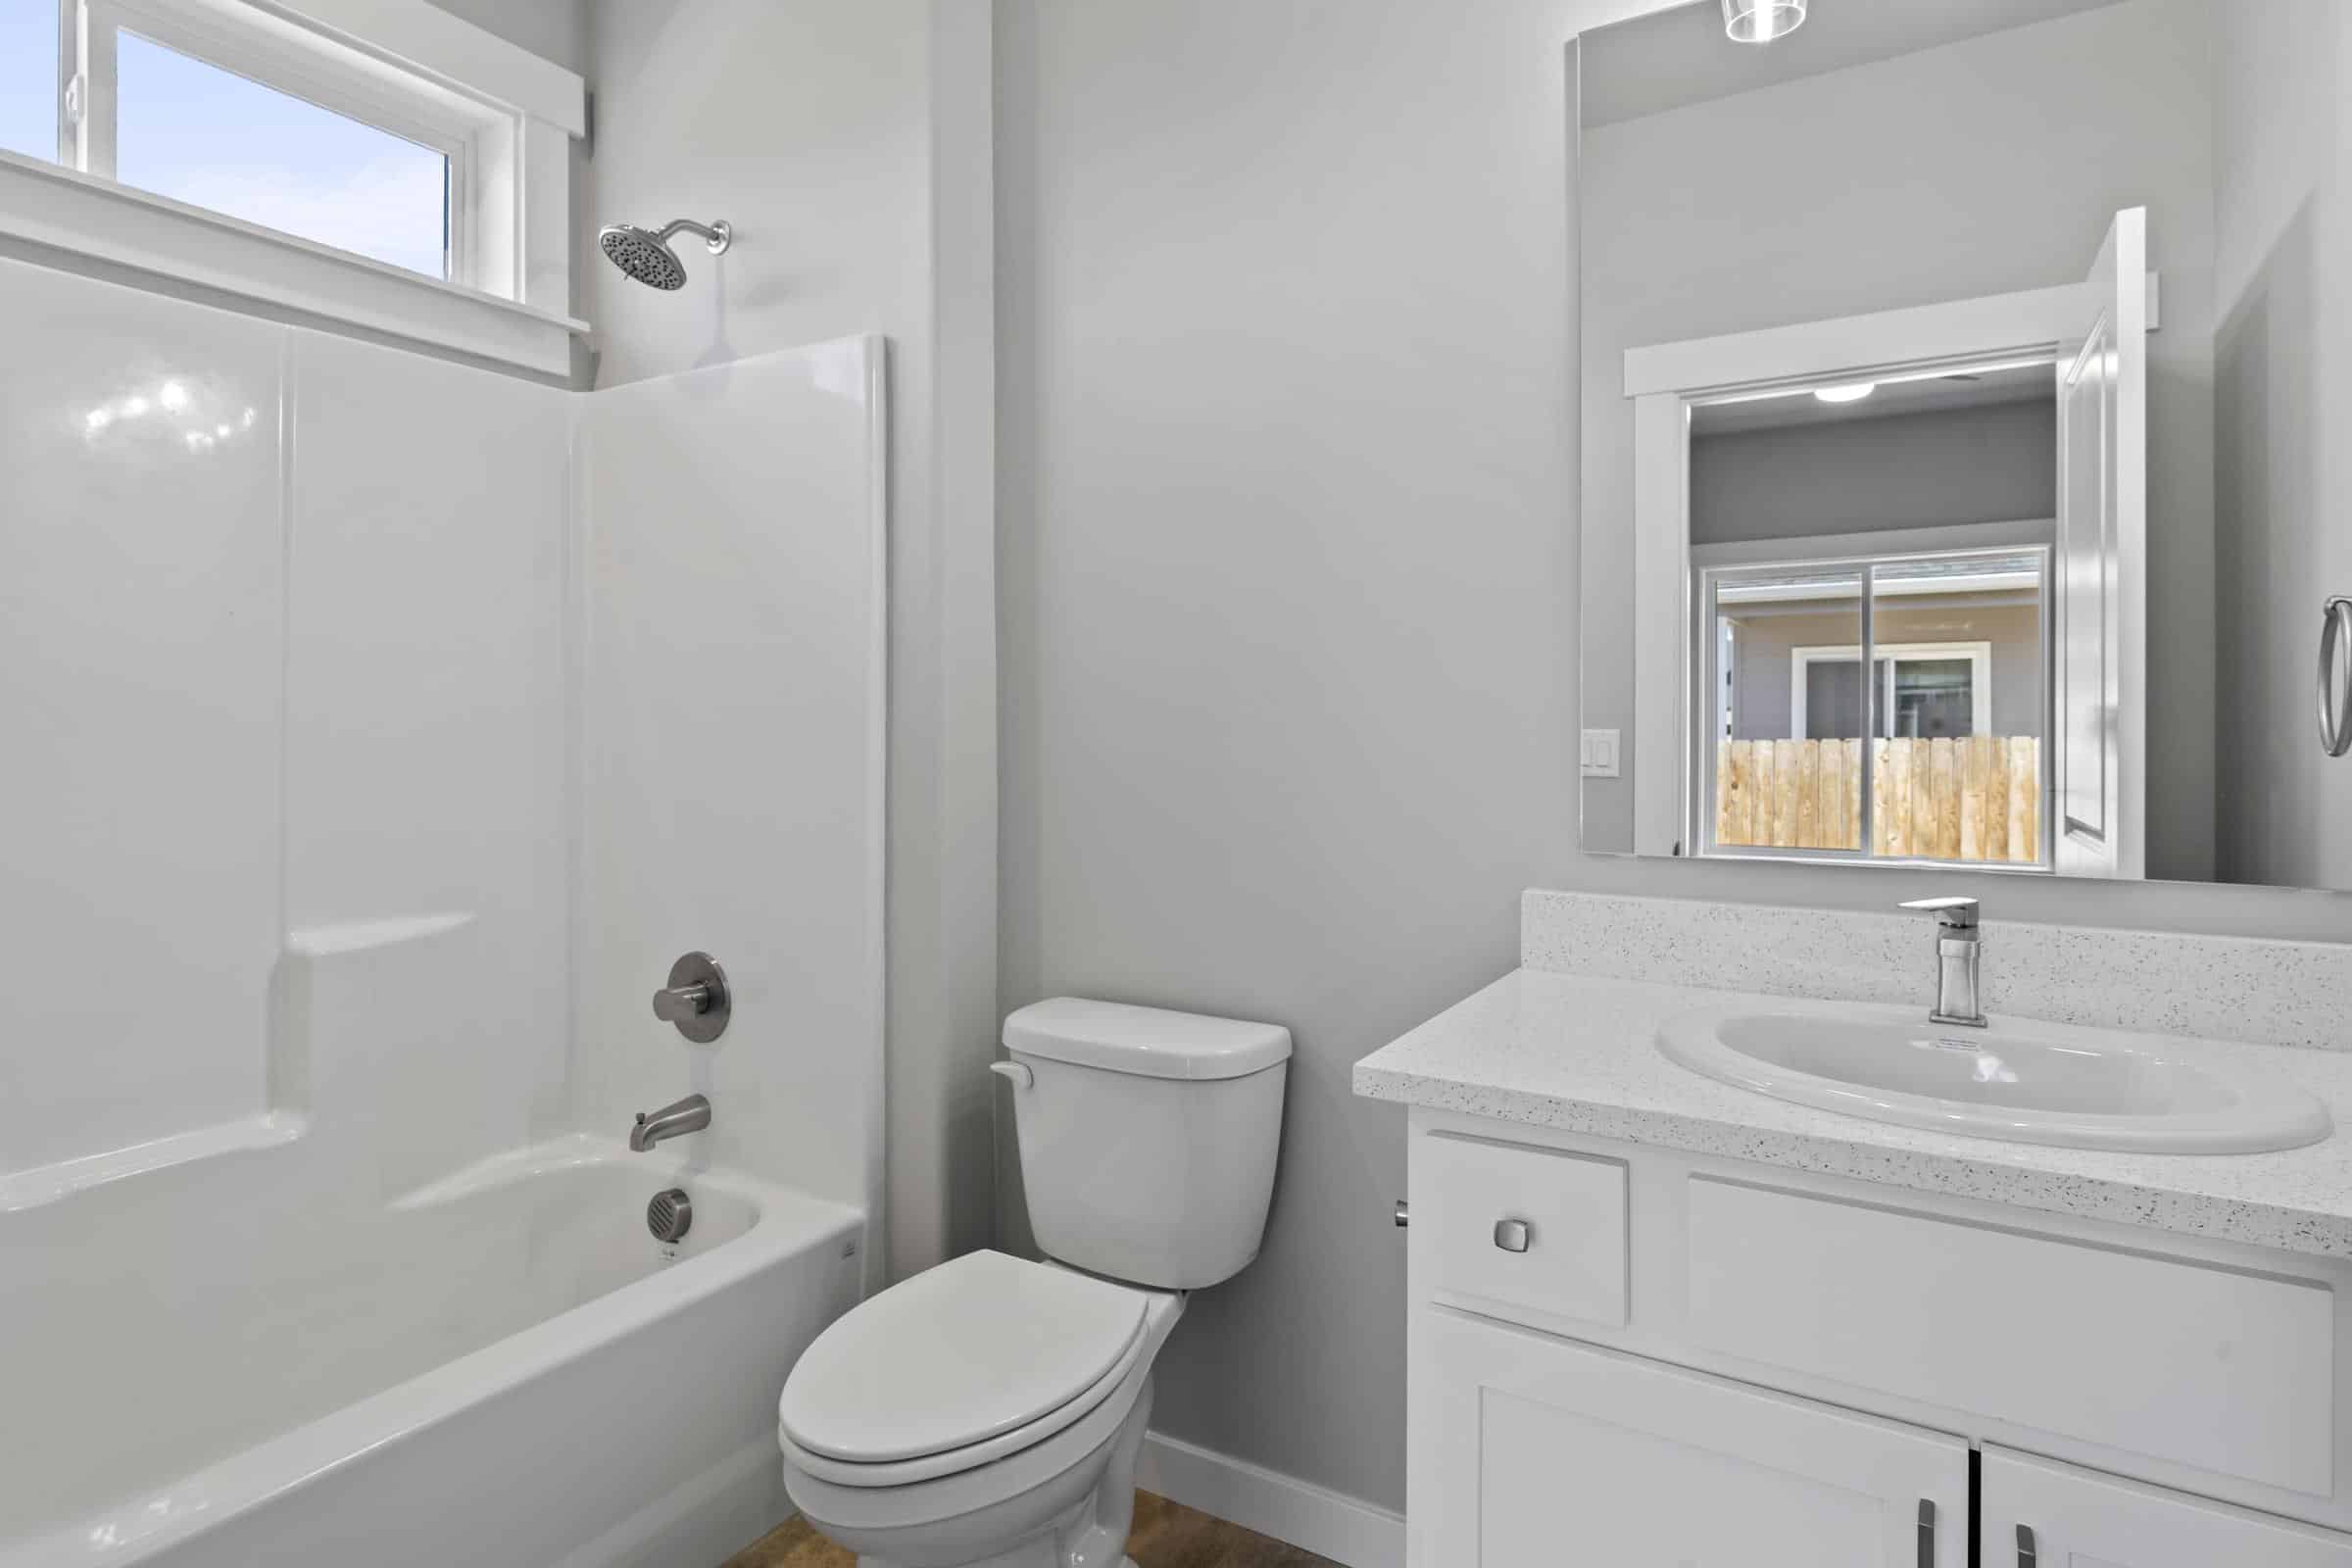 Minimalist bathroom with white countertop, sleek mirror, modern sink, and combined tub and shower.